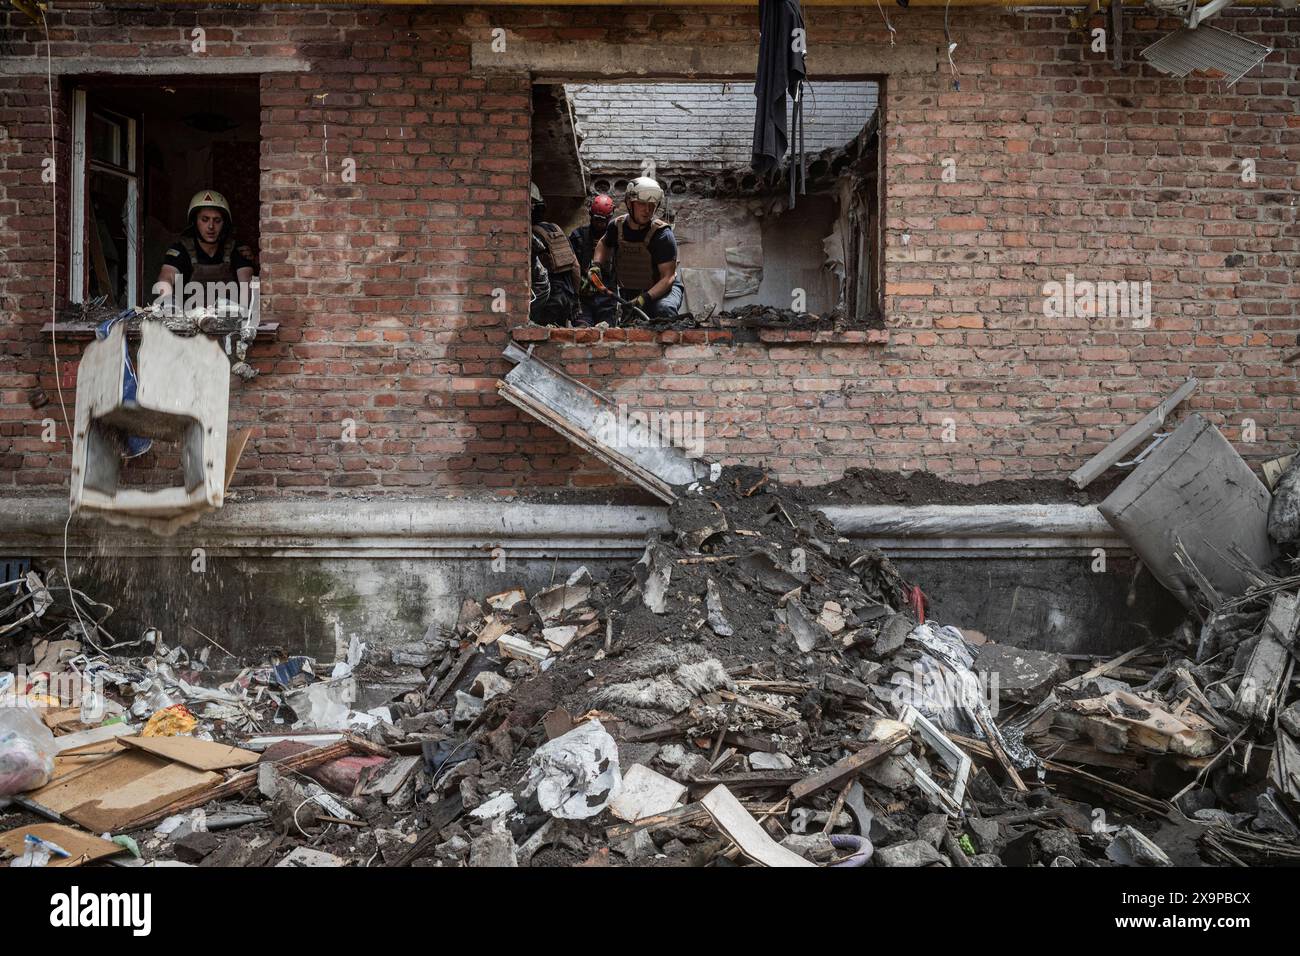 Nicolas Cleuet/Le Pictorium - Kharkiv - Two days after the attack on the residential district of Novobavarsky - 01/06/2024 - Ukraine/kharkiv oblast/Kharkiv - Two days after the strikes on a building in the Novobavarsky district, residents are trying to get back to life while the emergency services are busy. The fire brigade is still looking for evidence, and volunteers are clearing the area. The municipal services launched the first rehabilitation operations. Psychologists meet the most shocked.?The fire brigade discovered the remains of an eighth victim.? Stock Photo